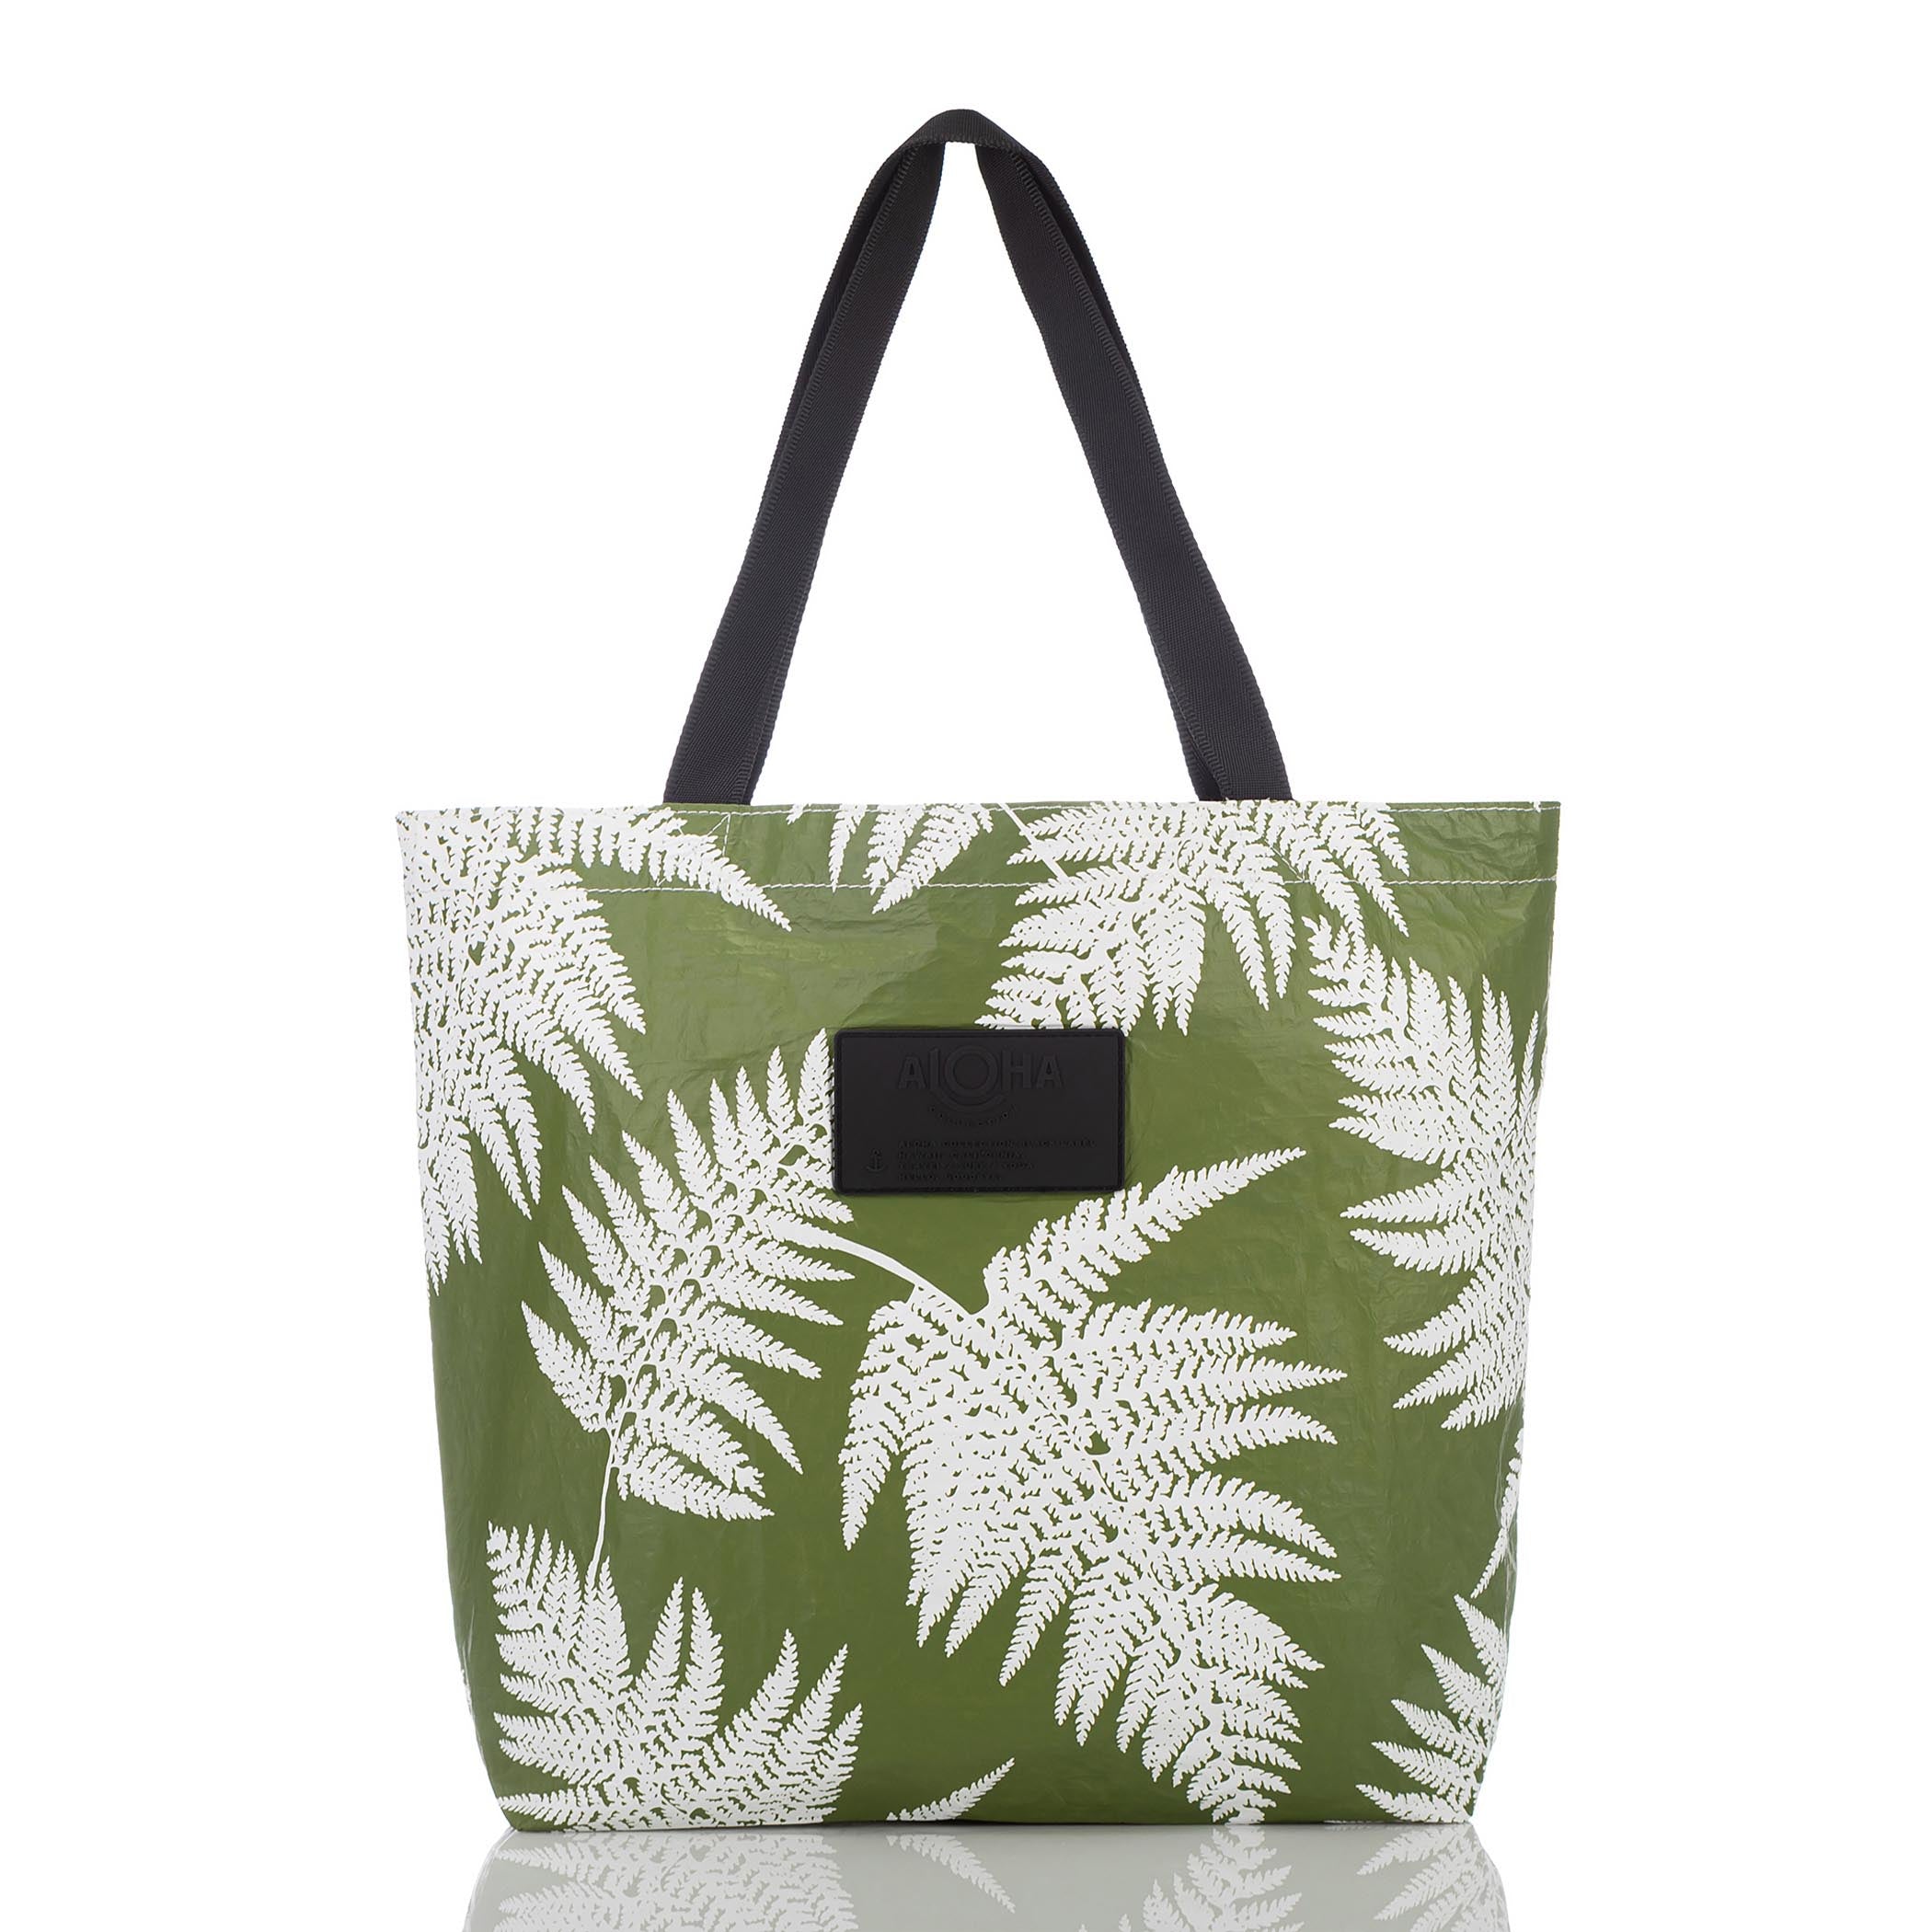 Palapalai Reversible Tote in Seaweed | ALOHA Collection